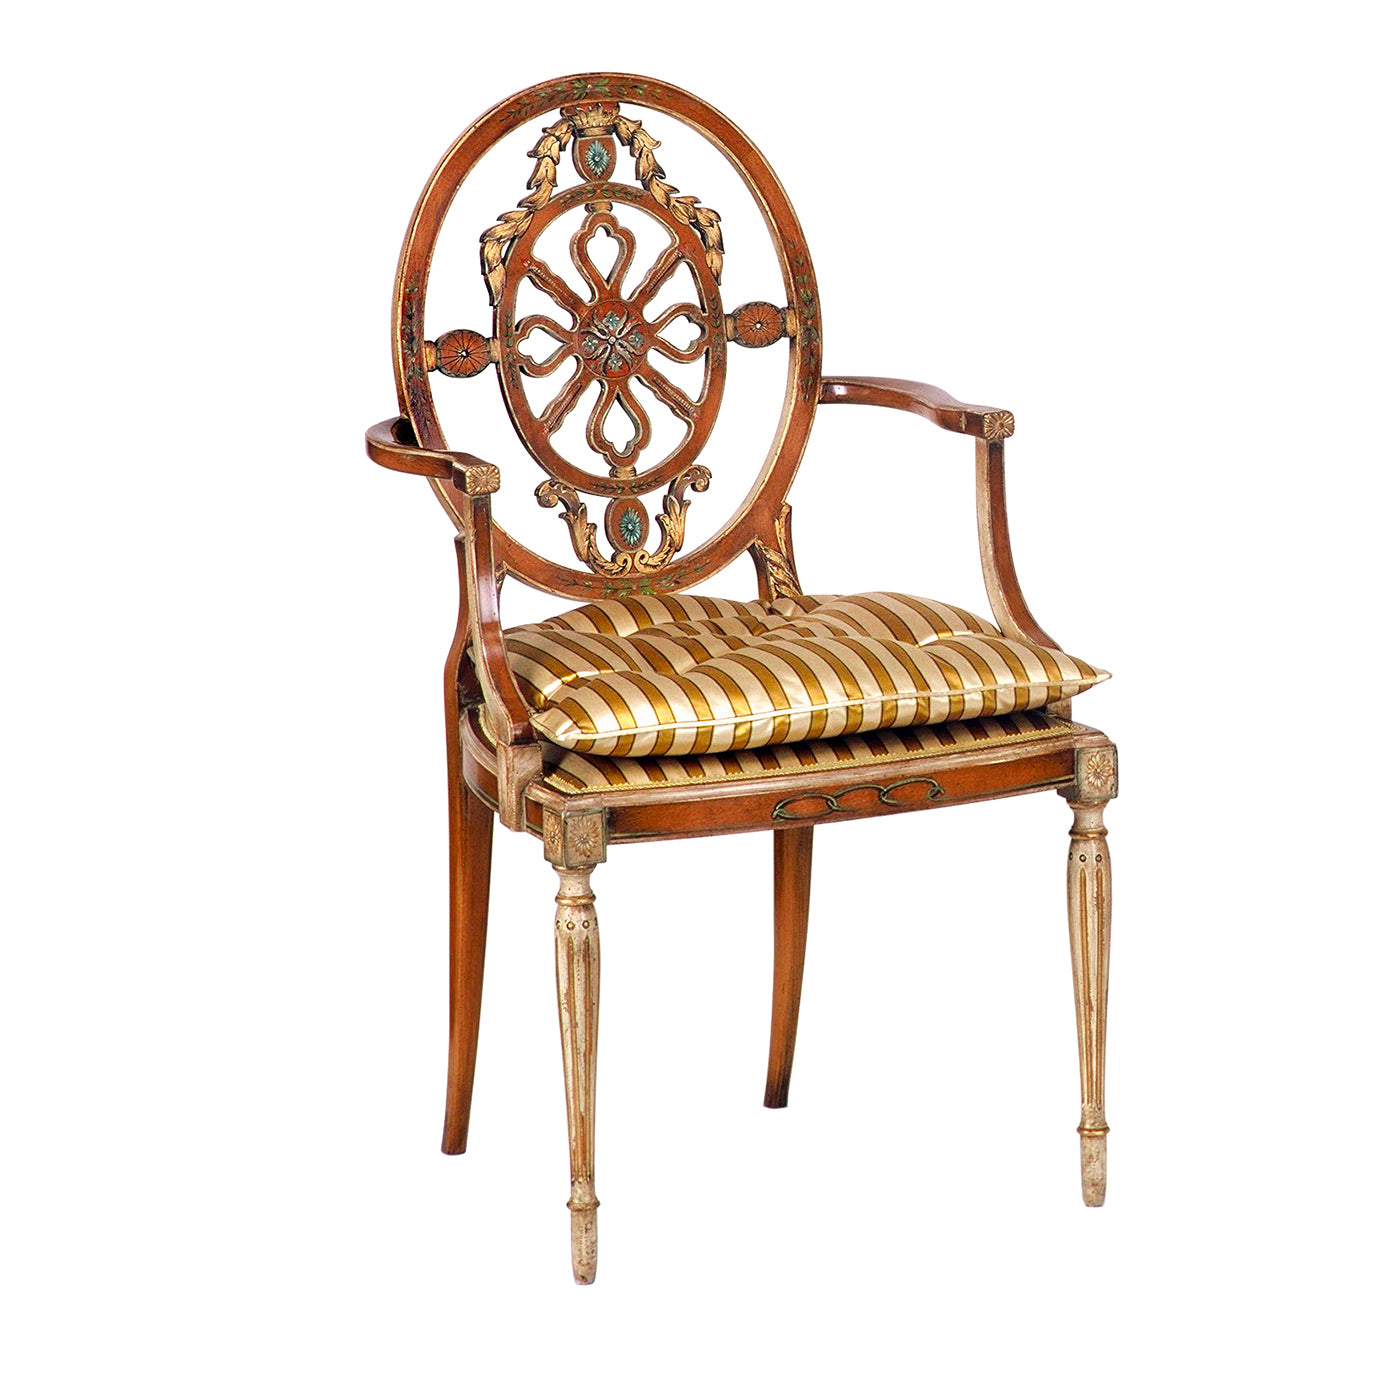 Hepplewhite-Style Polychrome Chair With Arms - Alternative view 1